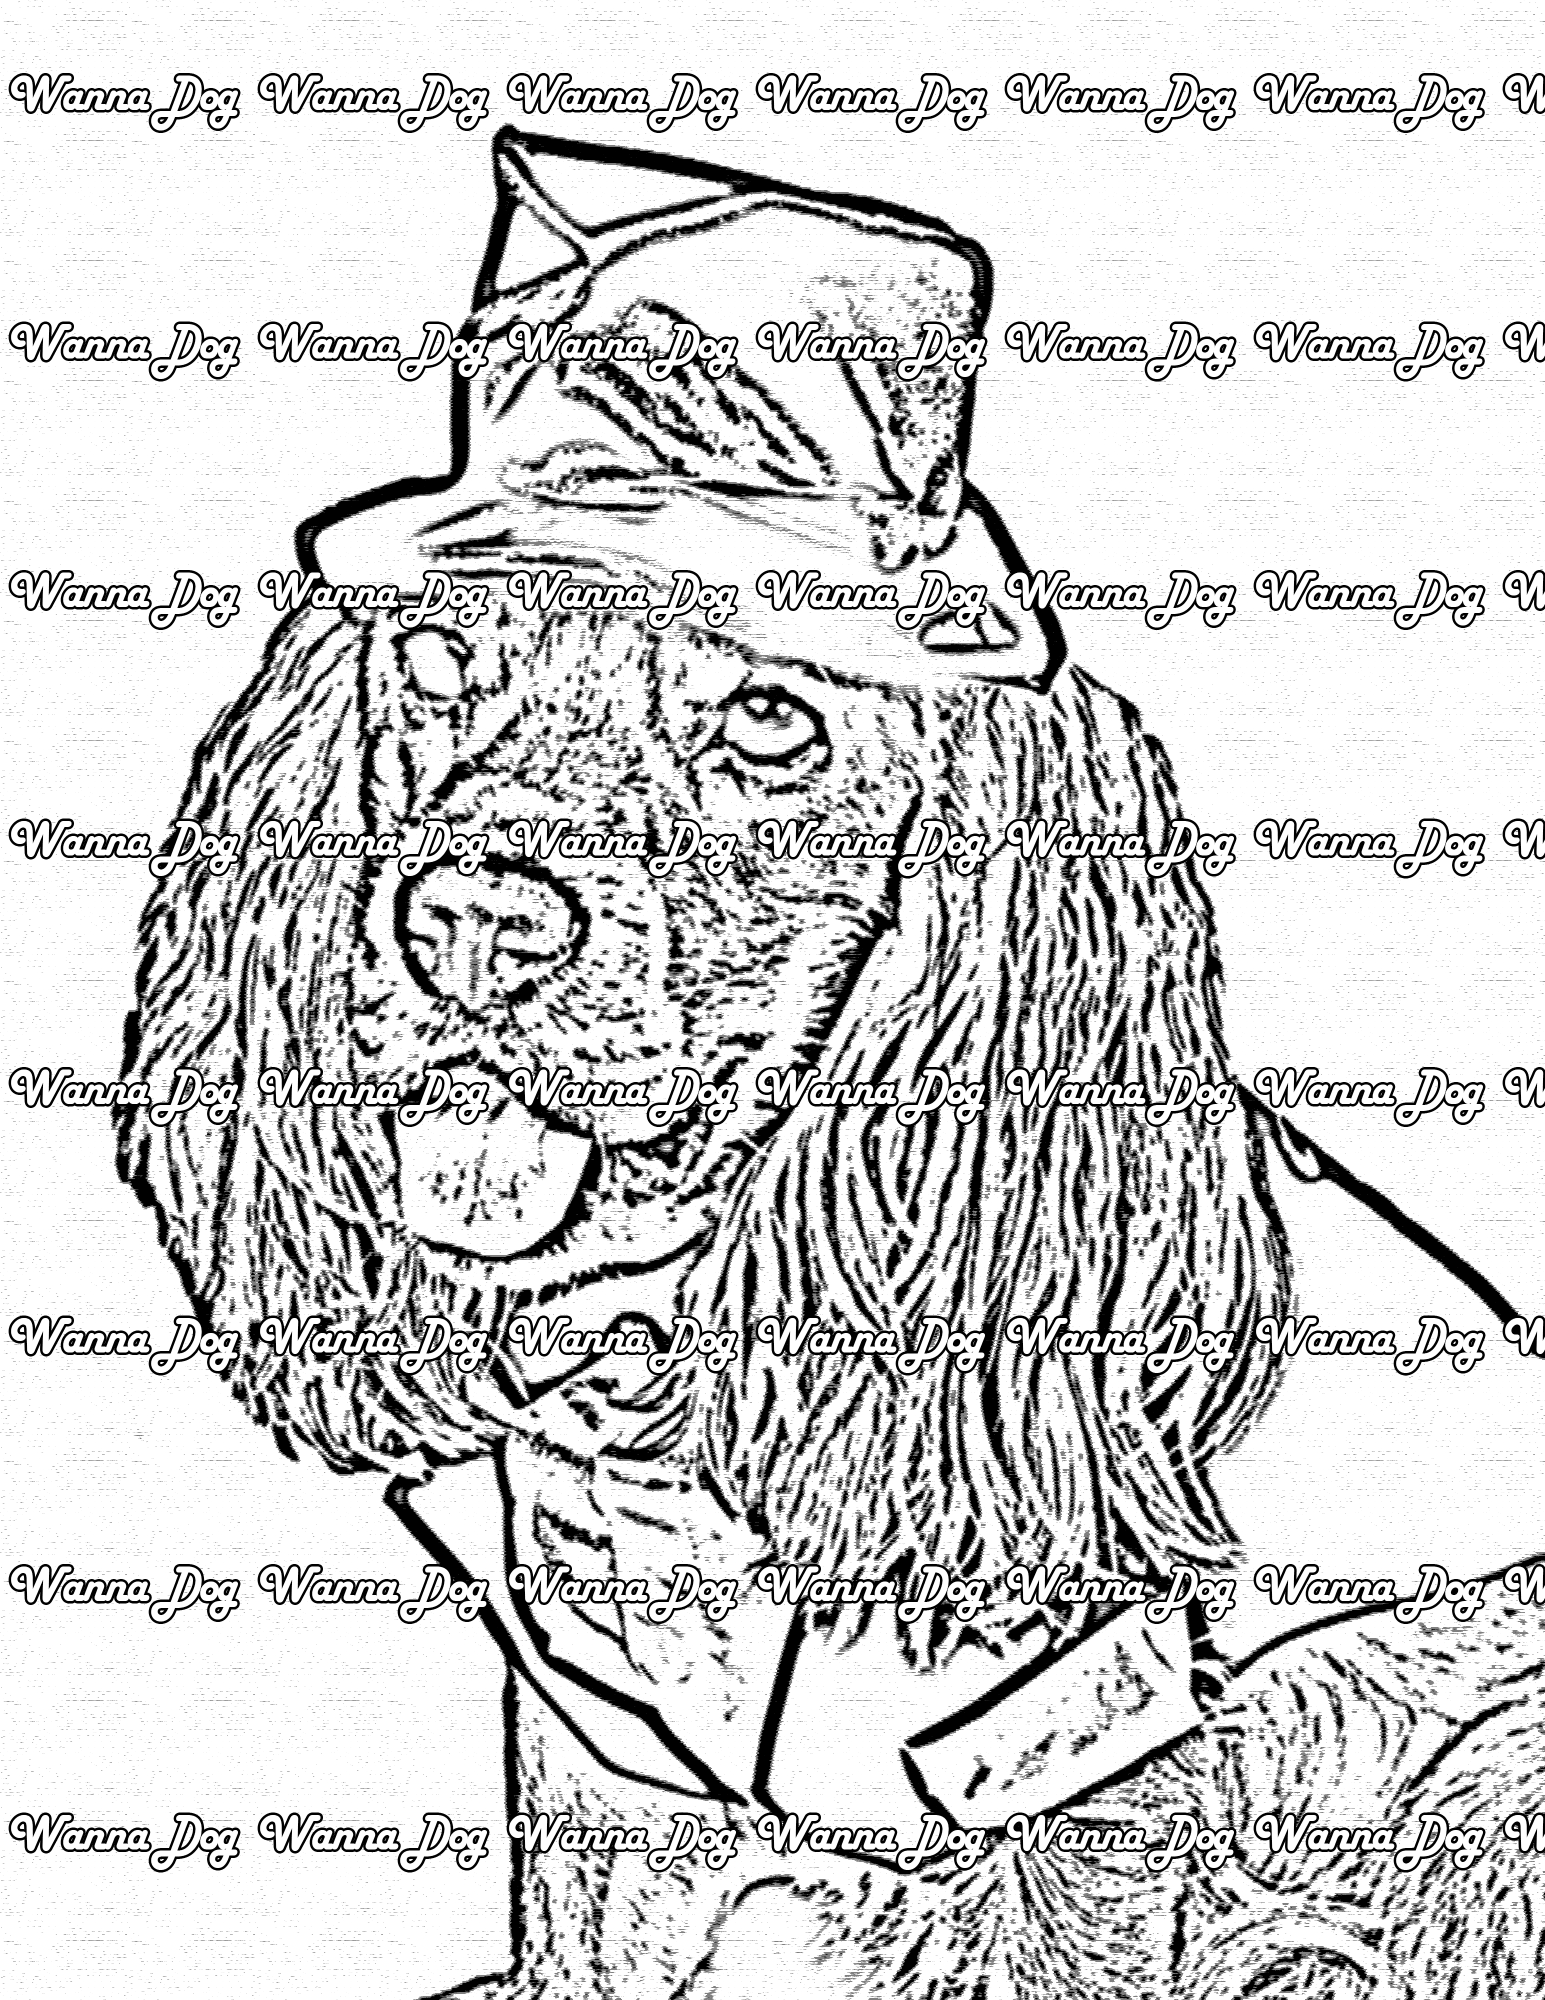 Cocker Spaniel Coloring Pages of a Cocker Spaniel wearing a top hat